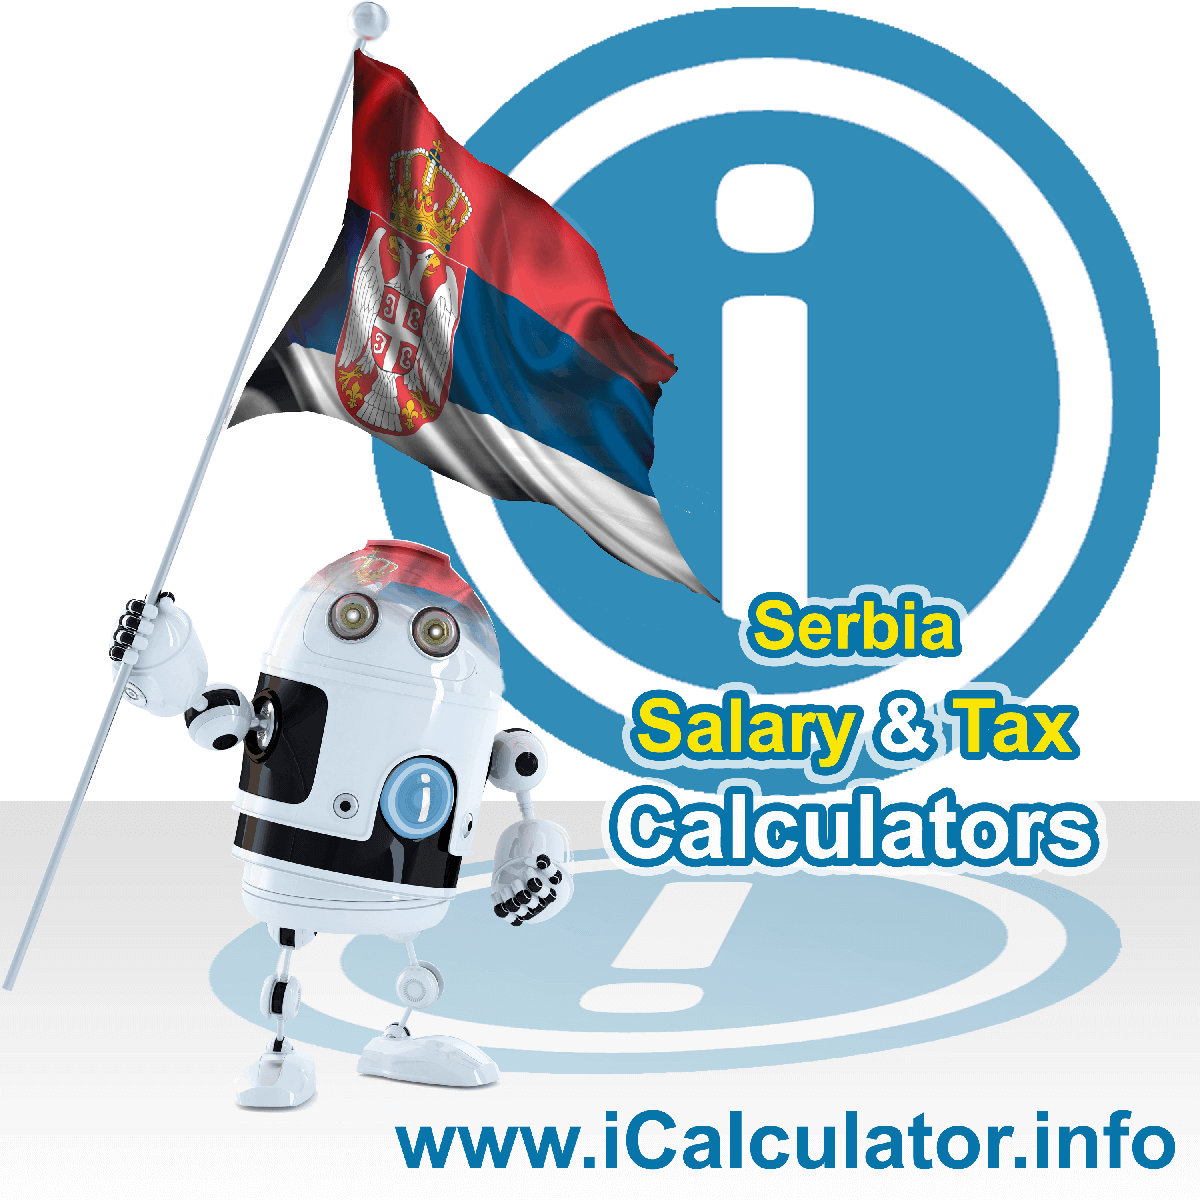 Serbia Tax Calculator. This image shows the Serbia flag and information relating to the tax formula for the Serbia Salary Calculator